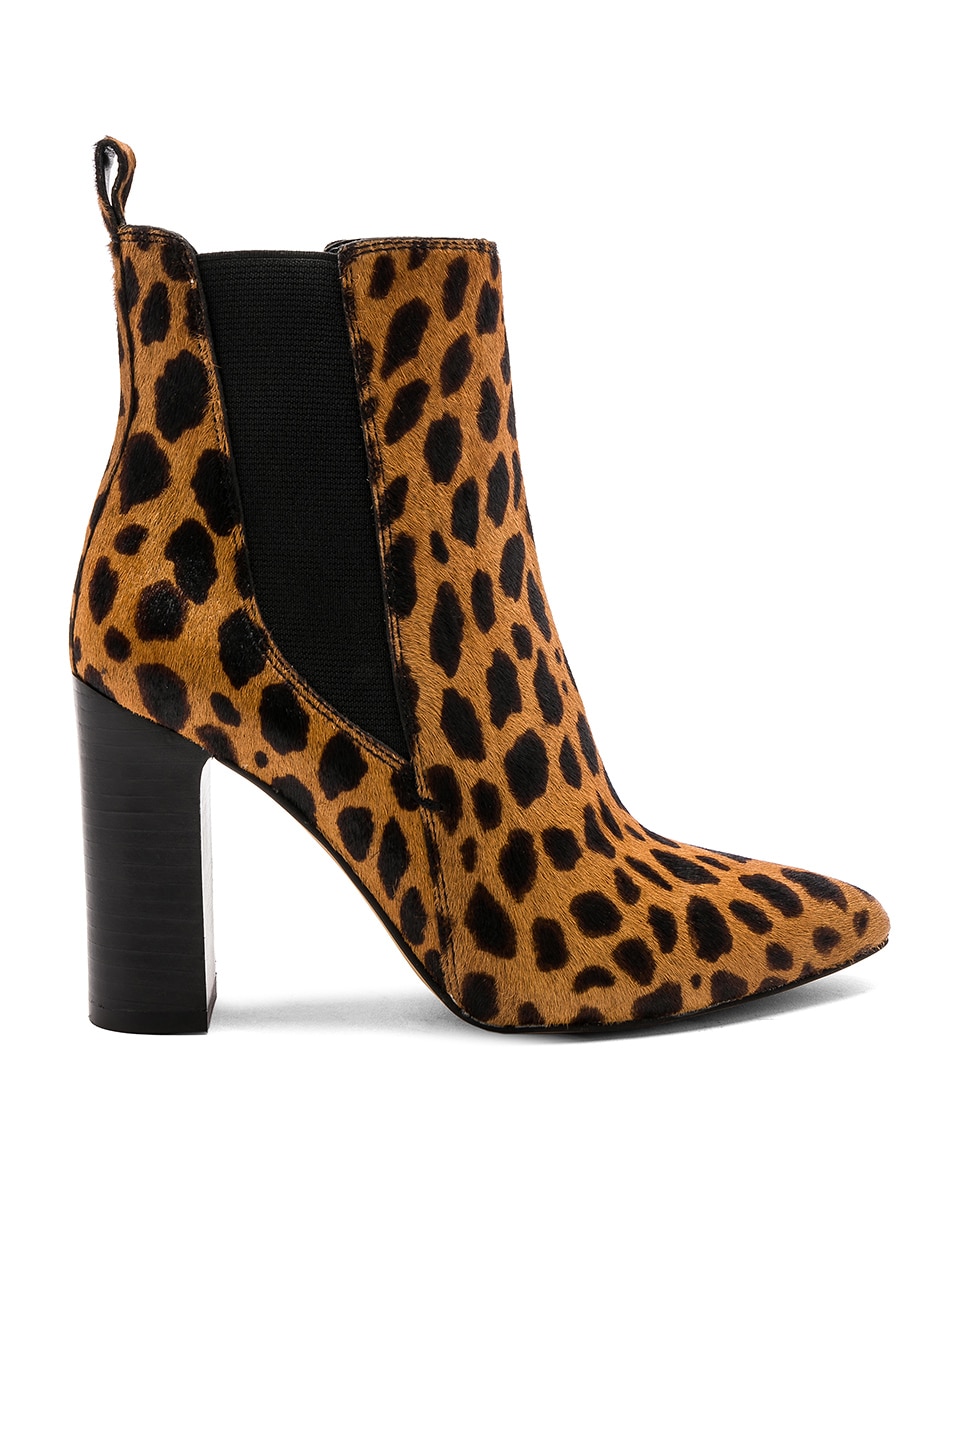 Vince Camuto Britsy 2 Cow Fur Bootie in Leopard | REVOLVE